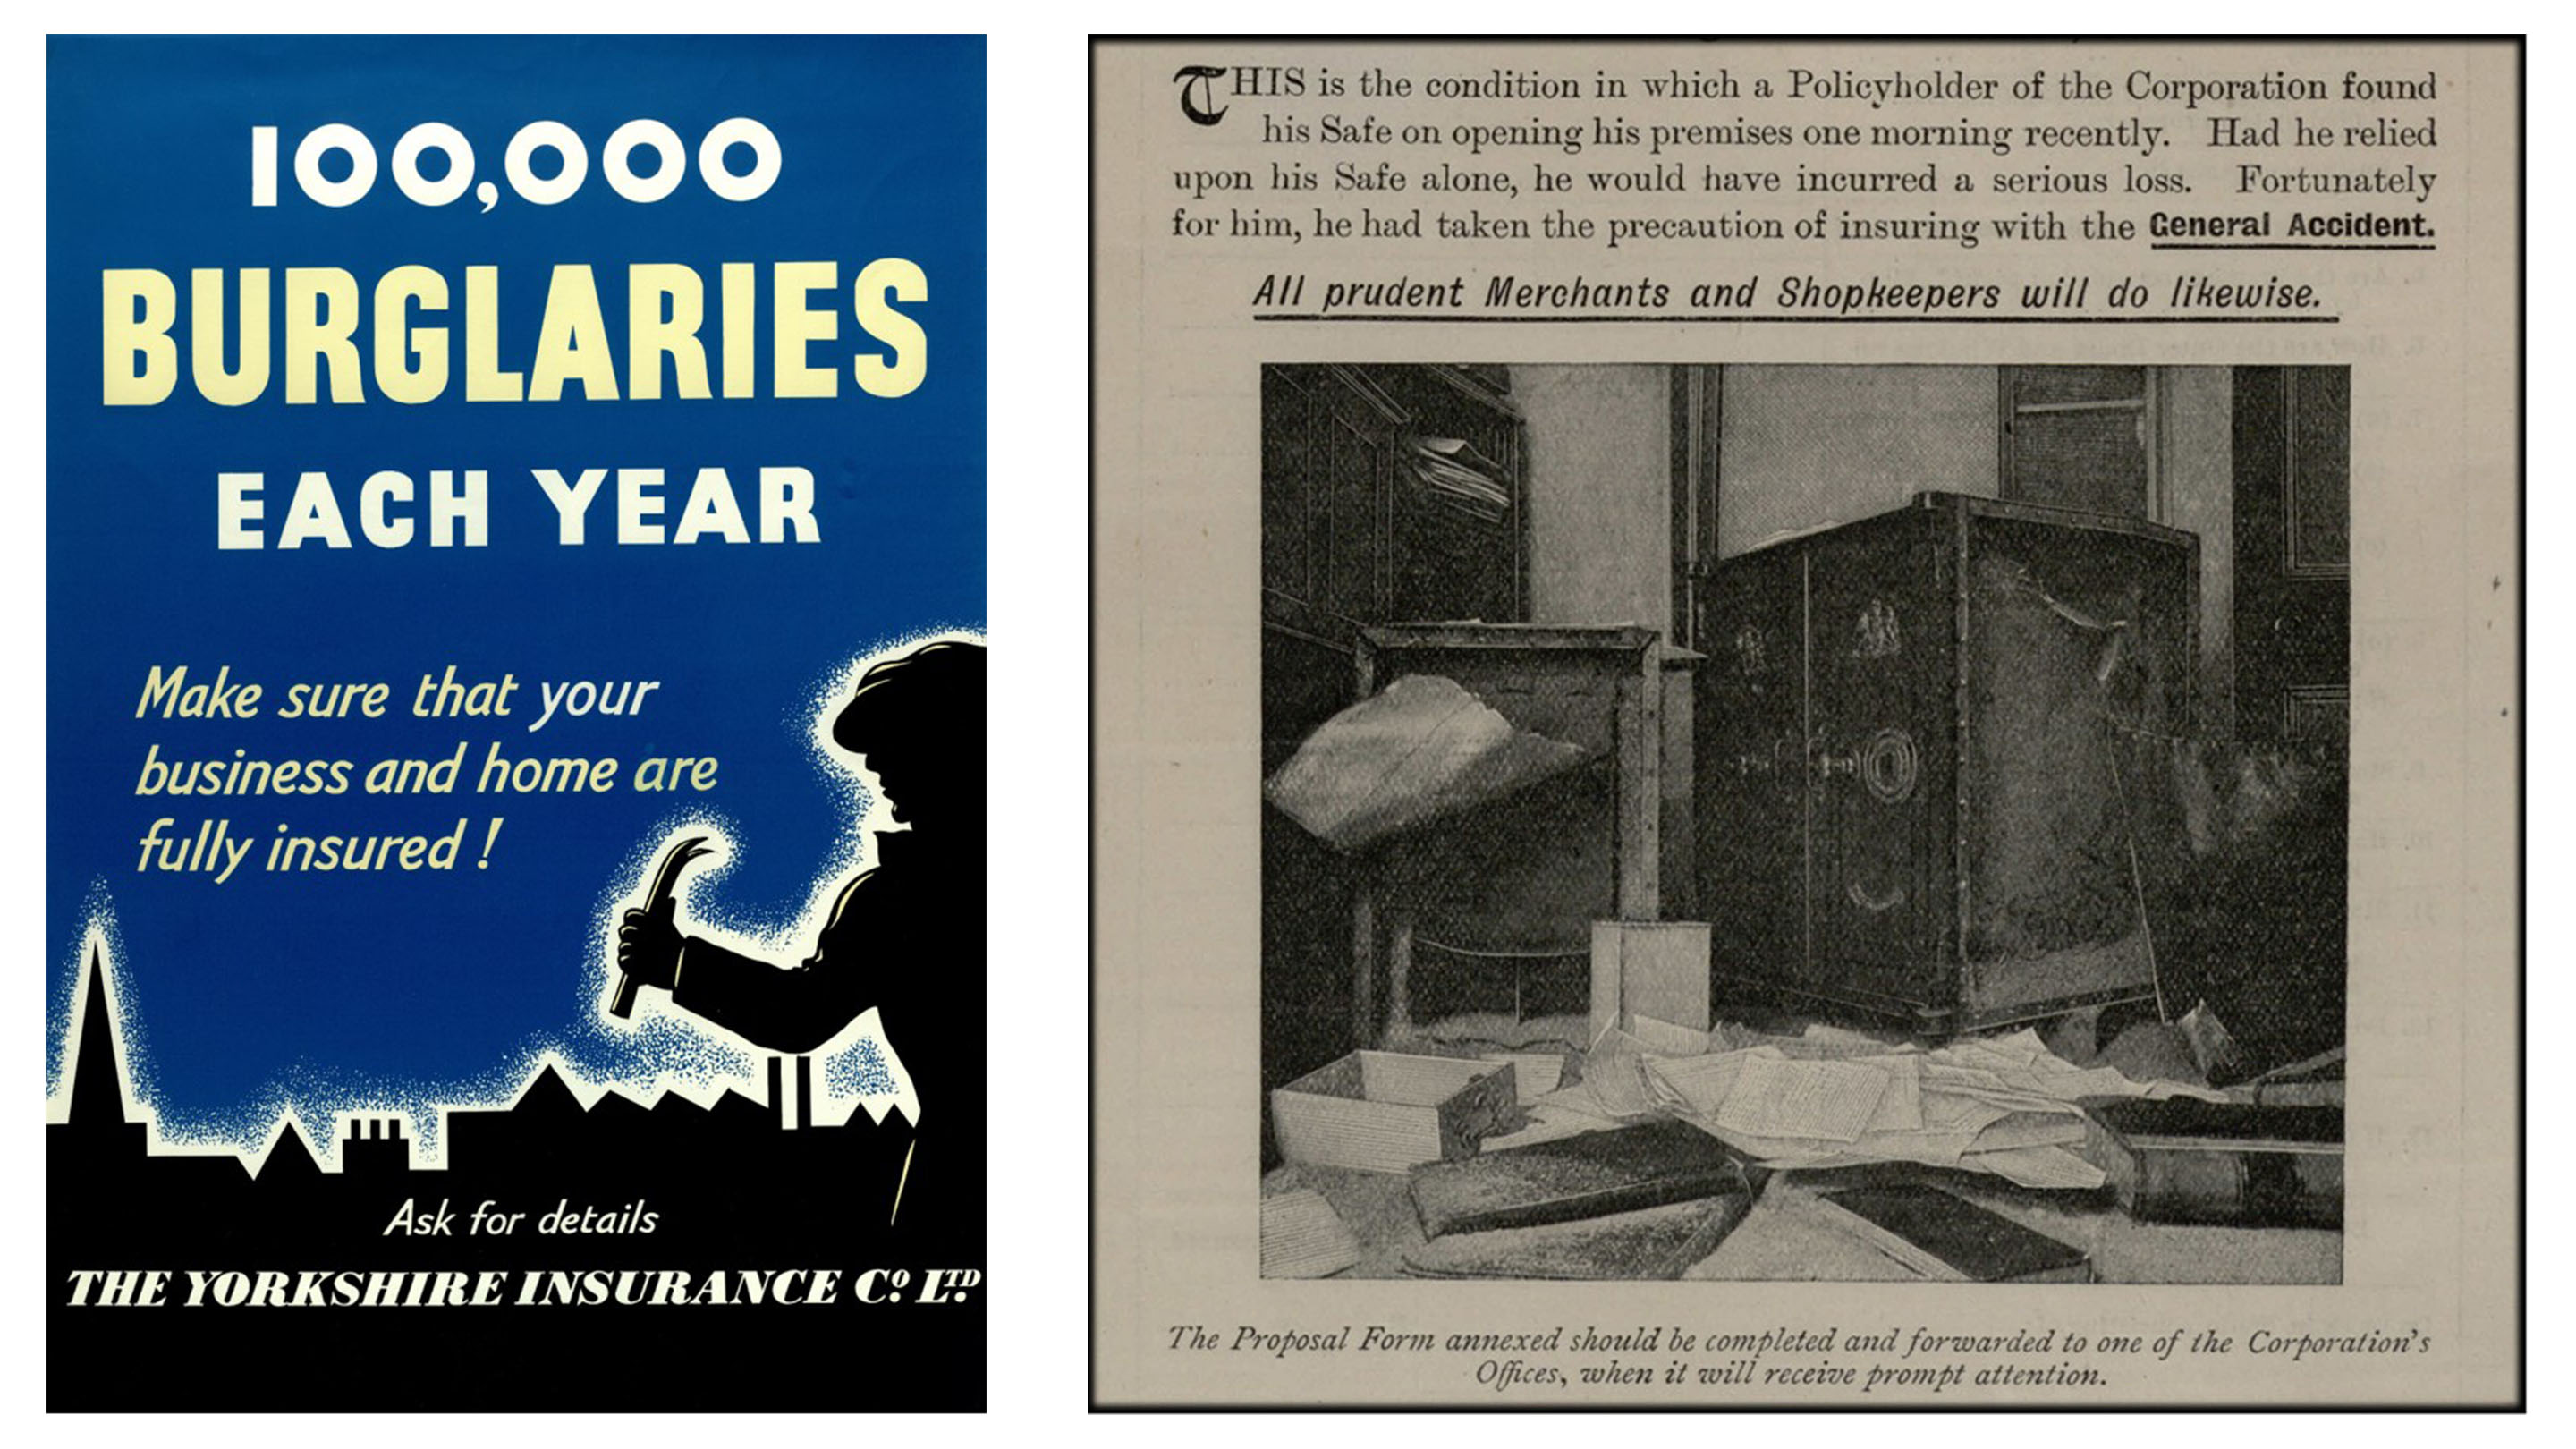 Yorkshire Insurance Co poster for burglary insurance (circa 1960) and a General Accident burglary proposal featuring a photograph of a burgled safe (circa 1905)